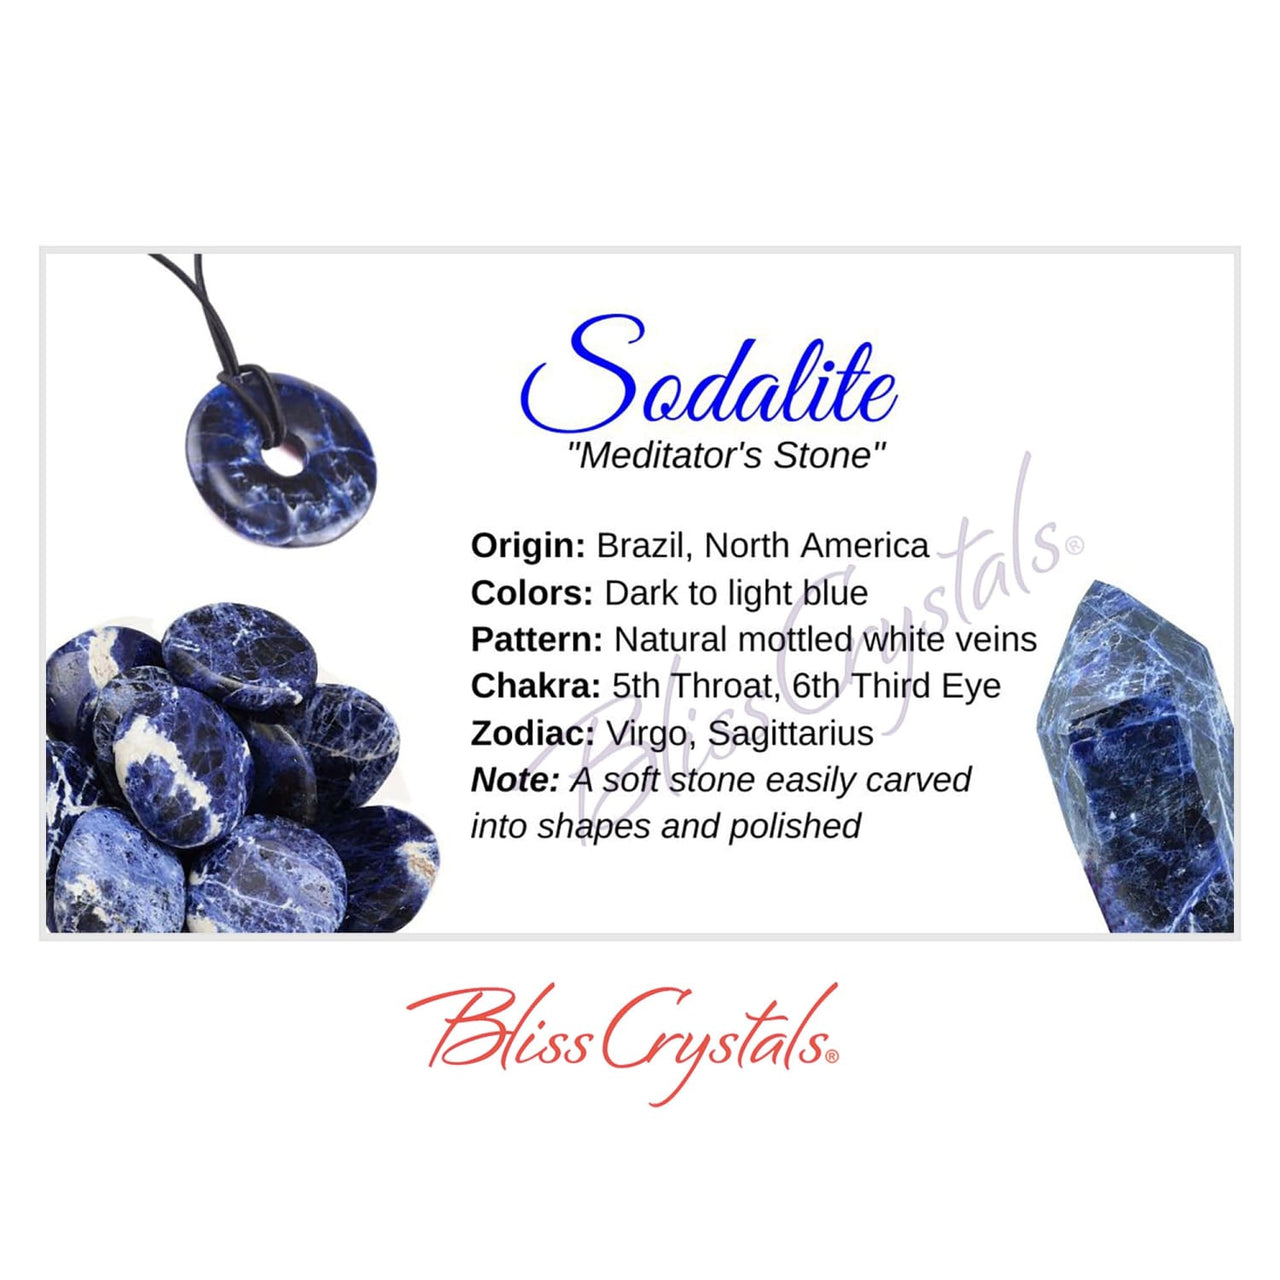 SODALITE Crystal Information Card Double sided #HC70 - $1.25